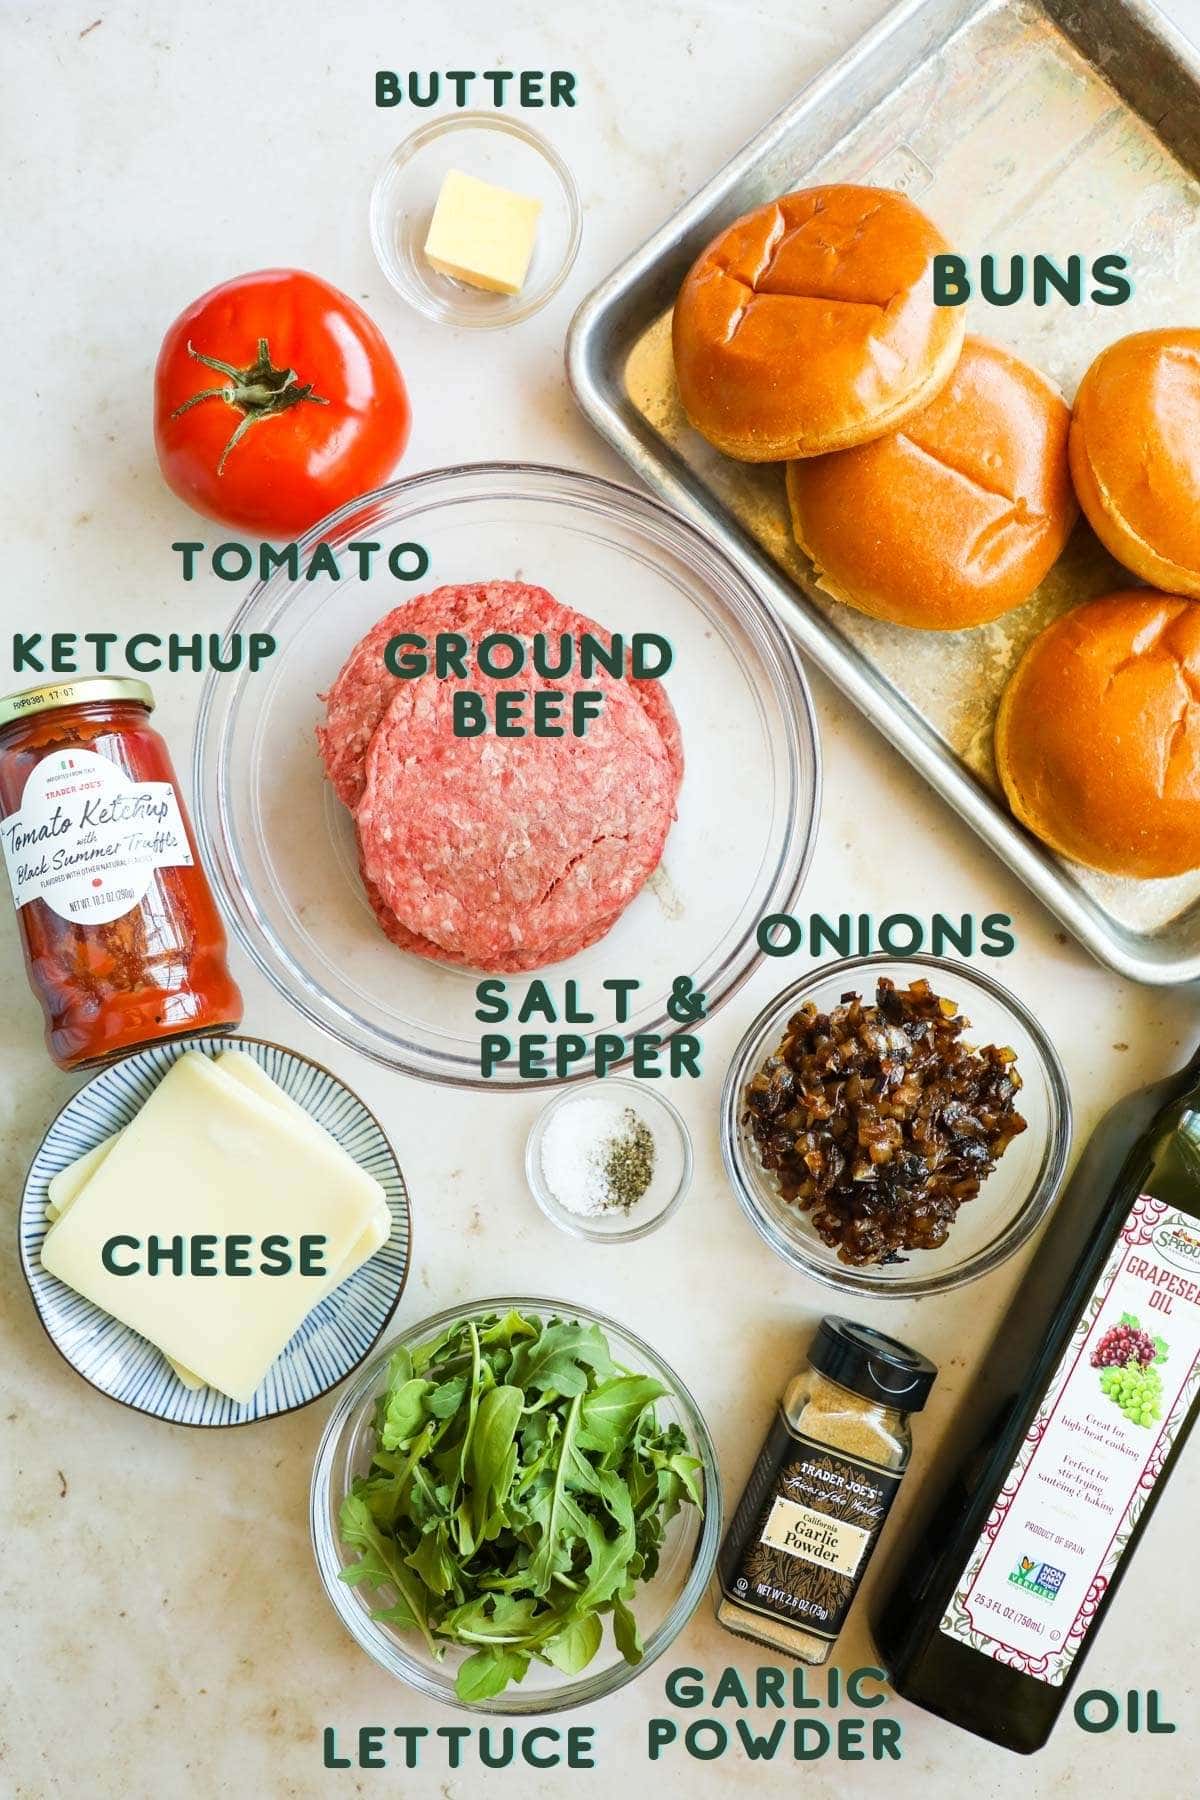 Ingredients to make cast iron skillet burgers on the stovetop.